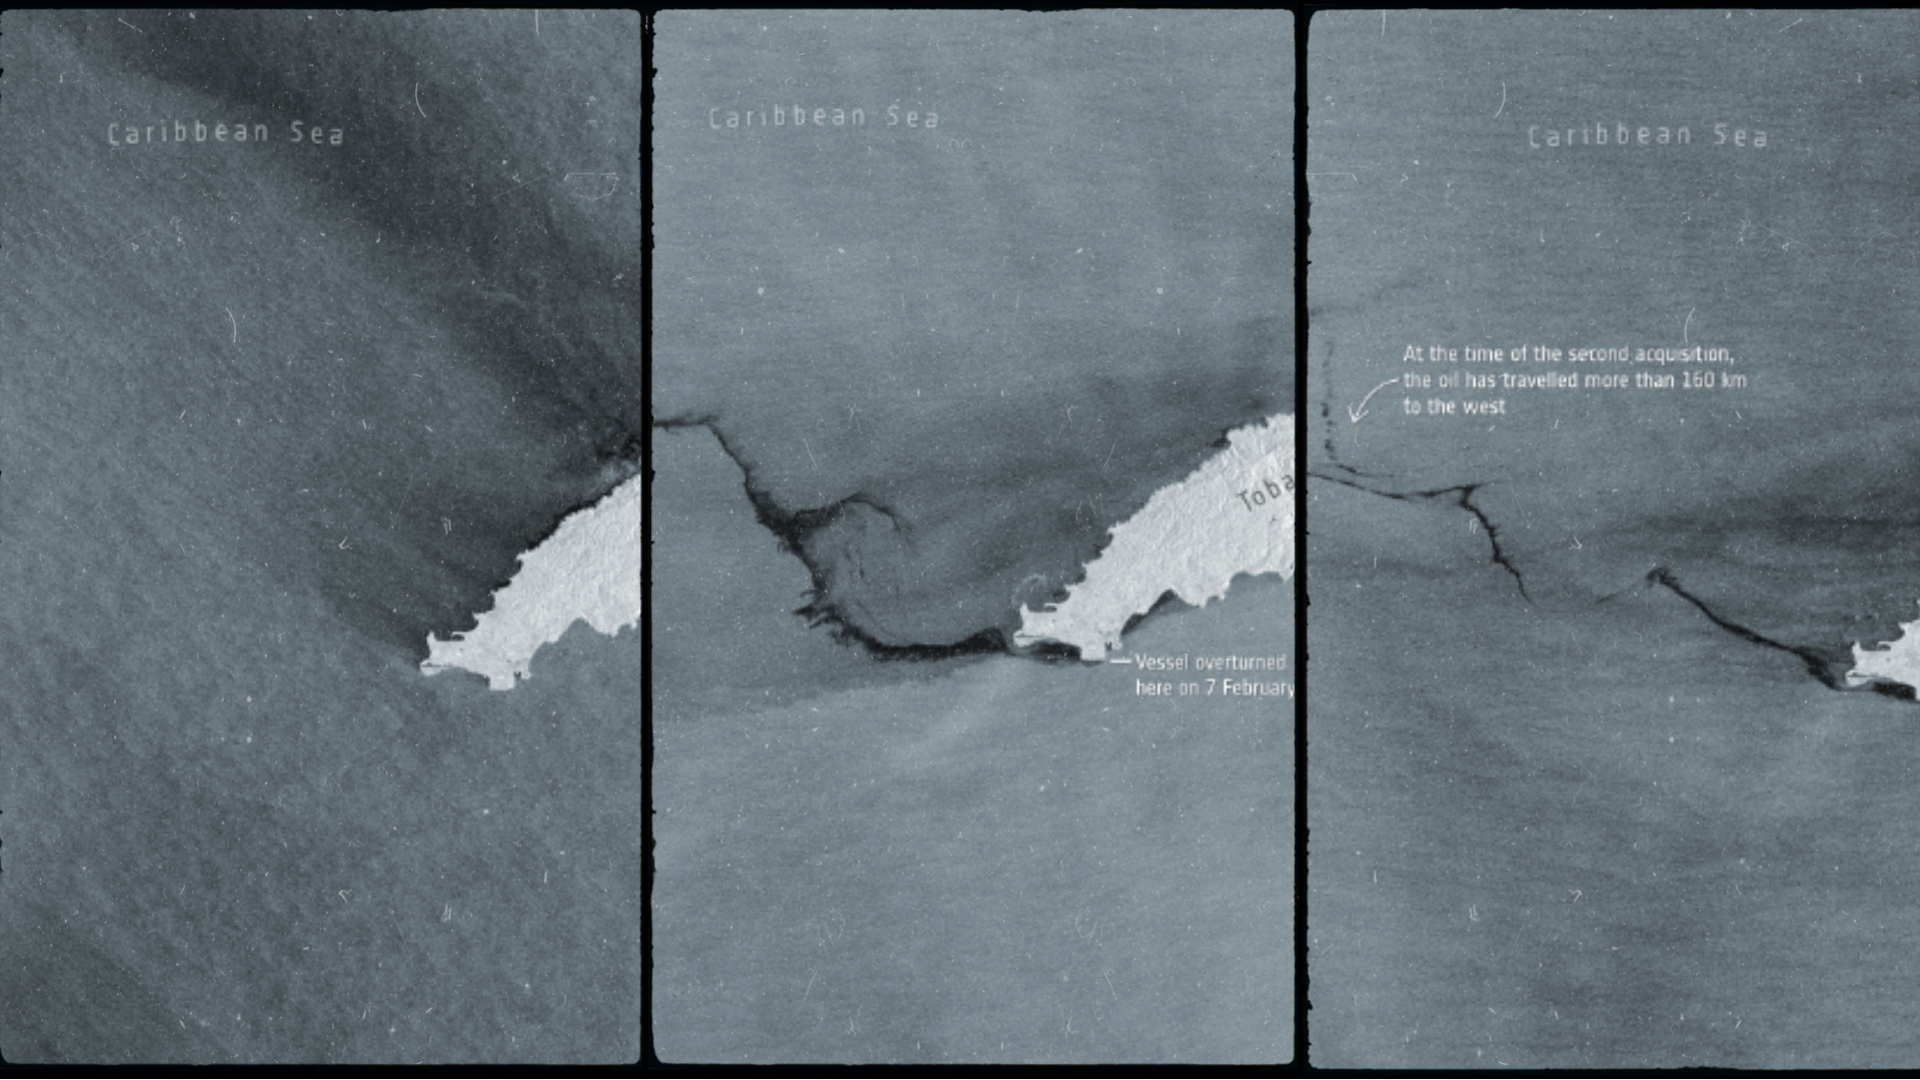 Photo on the left shows Tobago’s shore before oil spill on 7 February, with the other two photos showing the black slick visible on 7 and 14 February